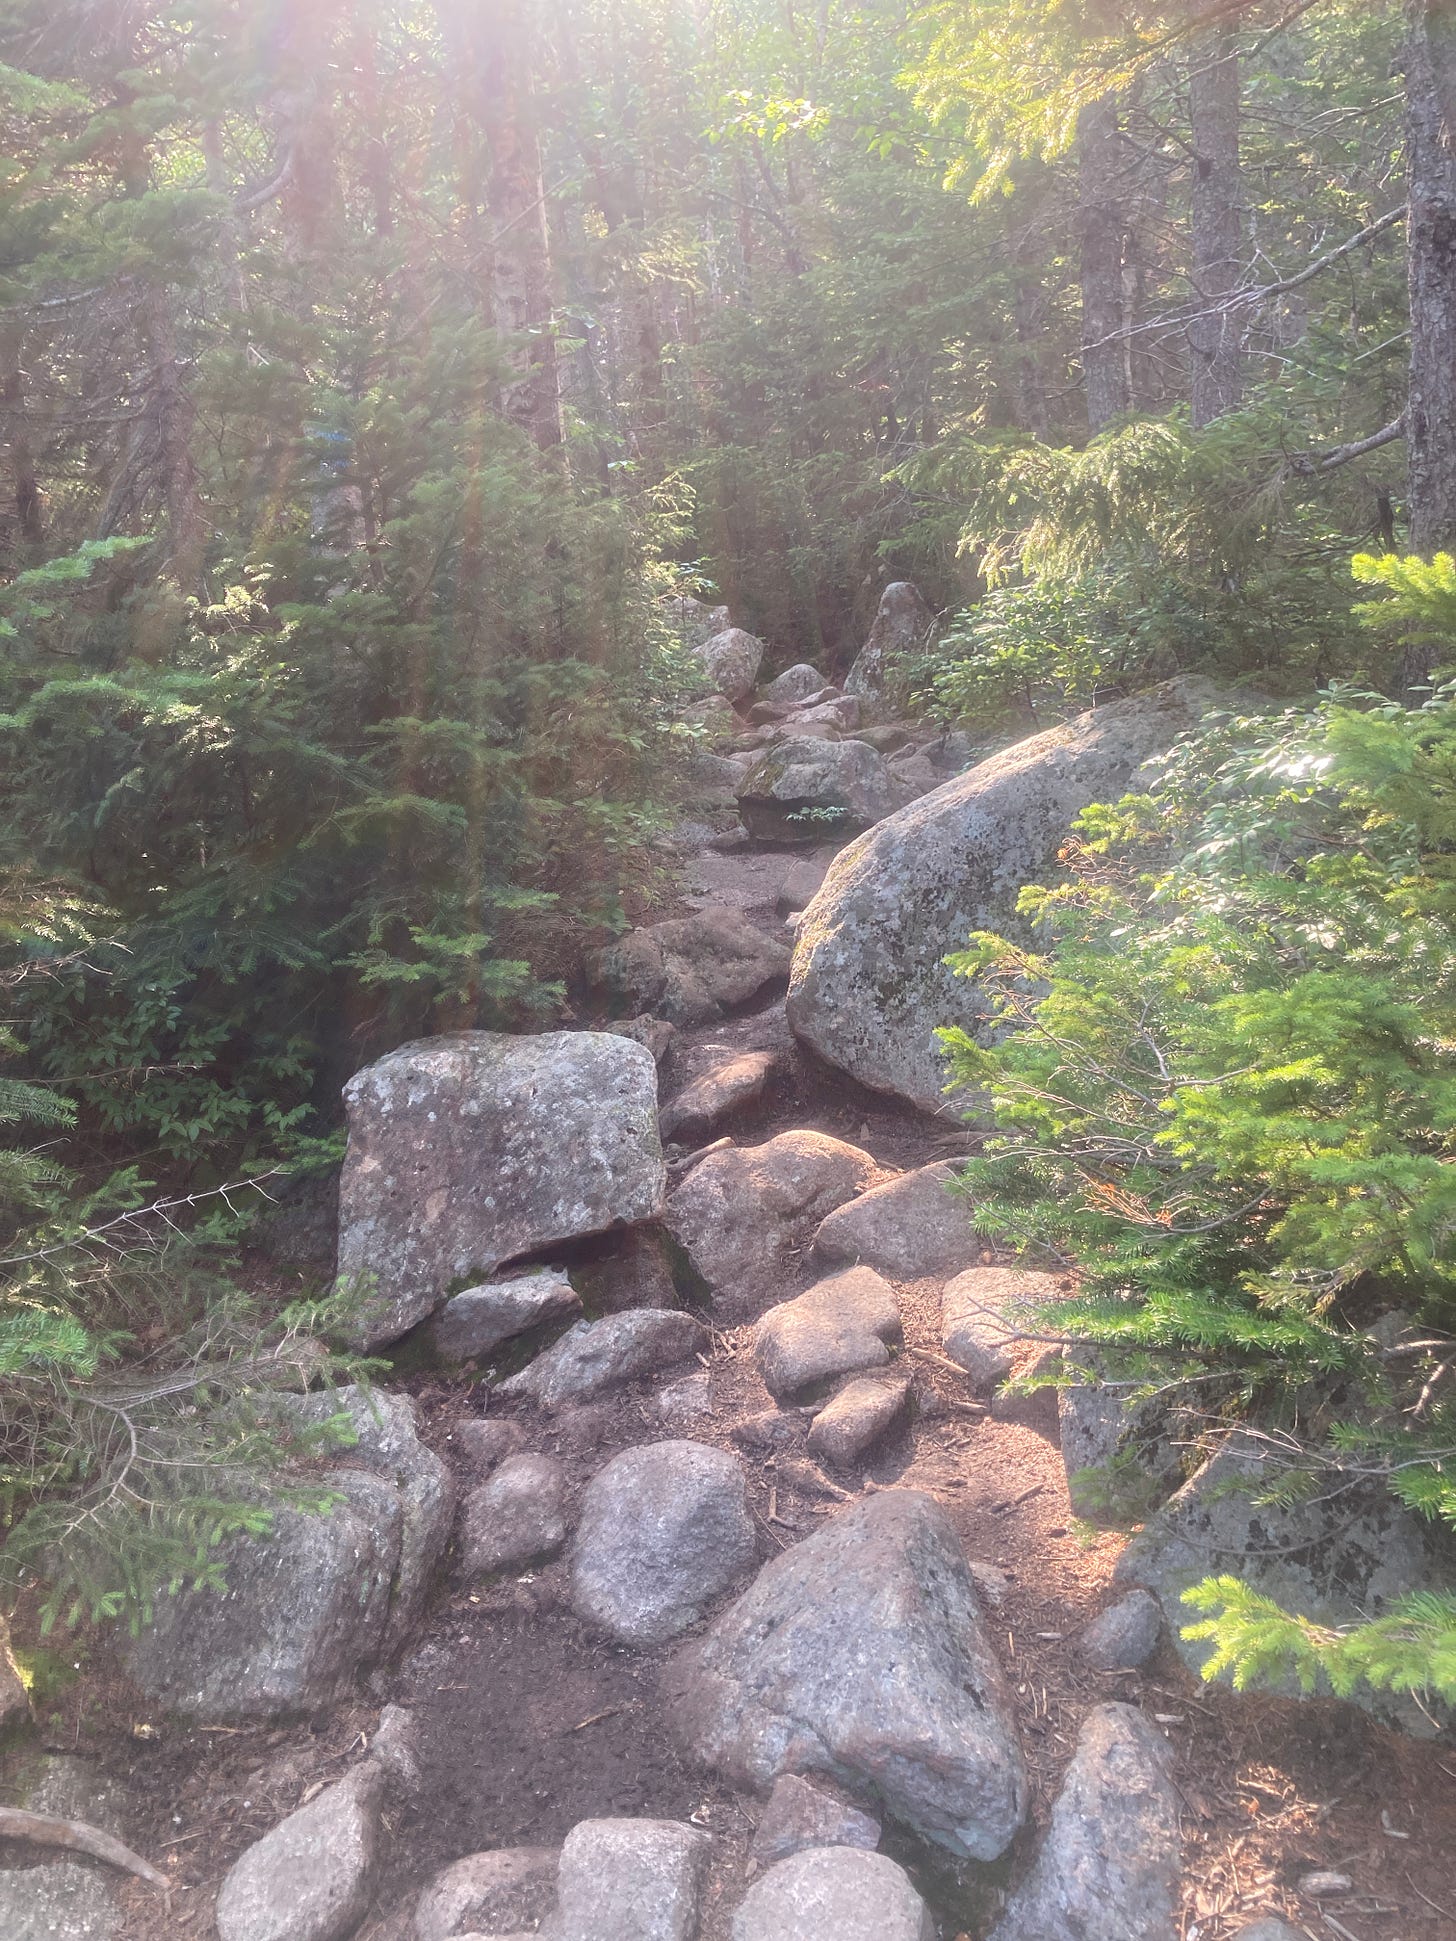 A rocky trail leaqds off into the deep woods, with sunbeams shining down. A blissfully tab-free environment.